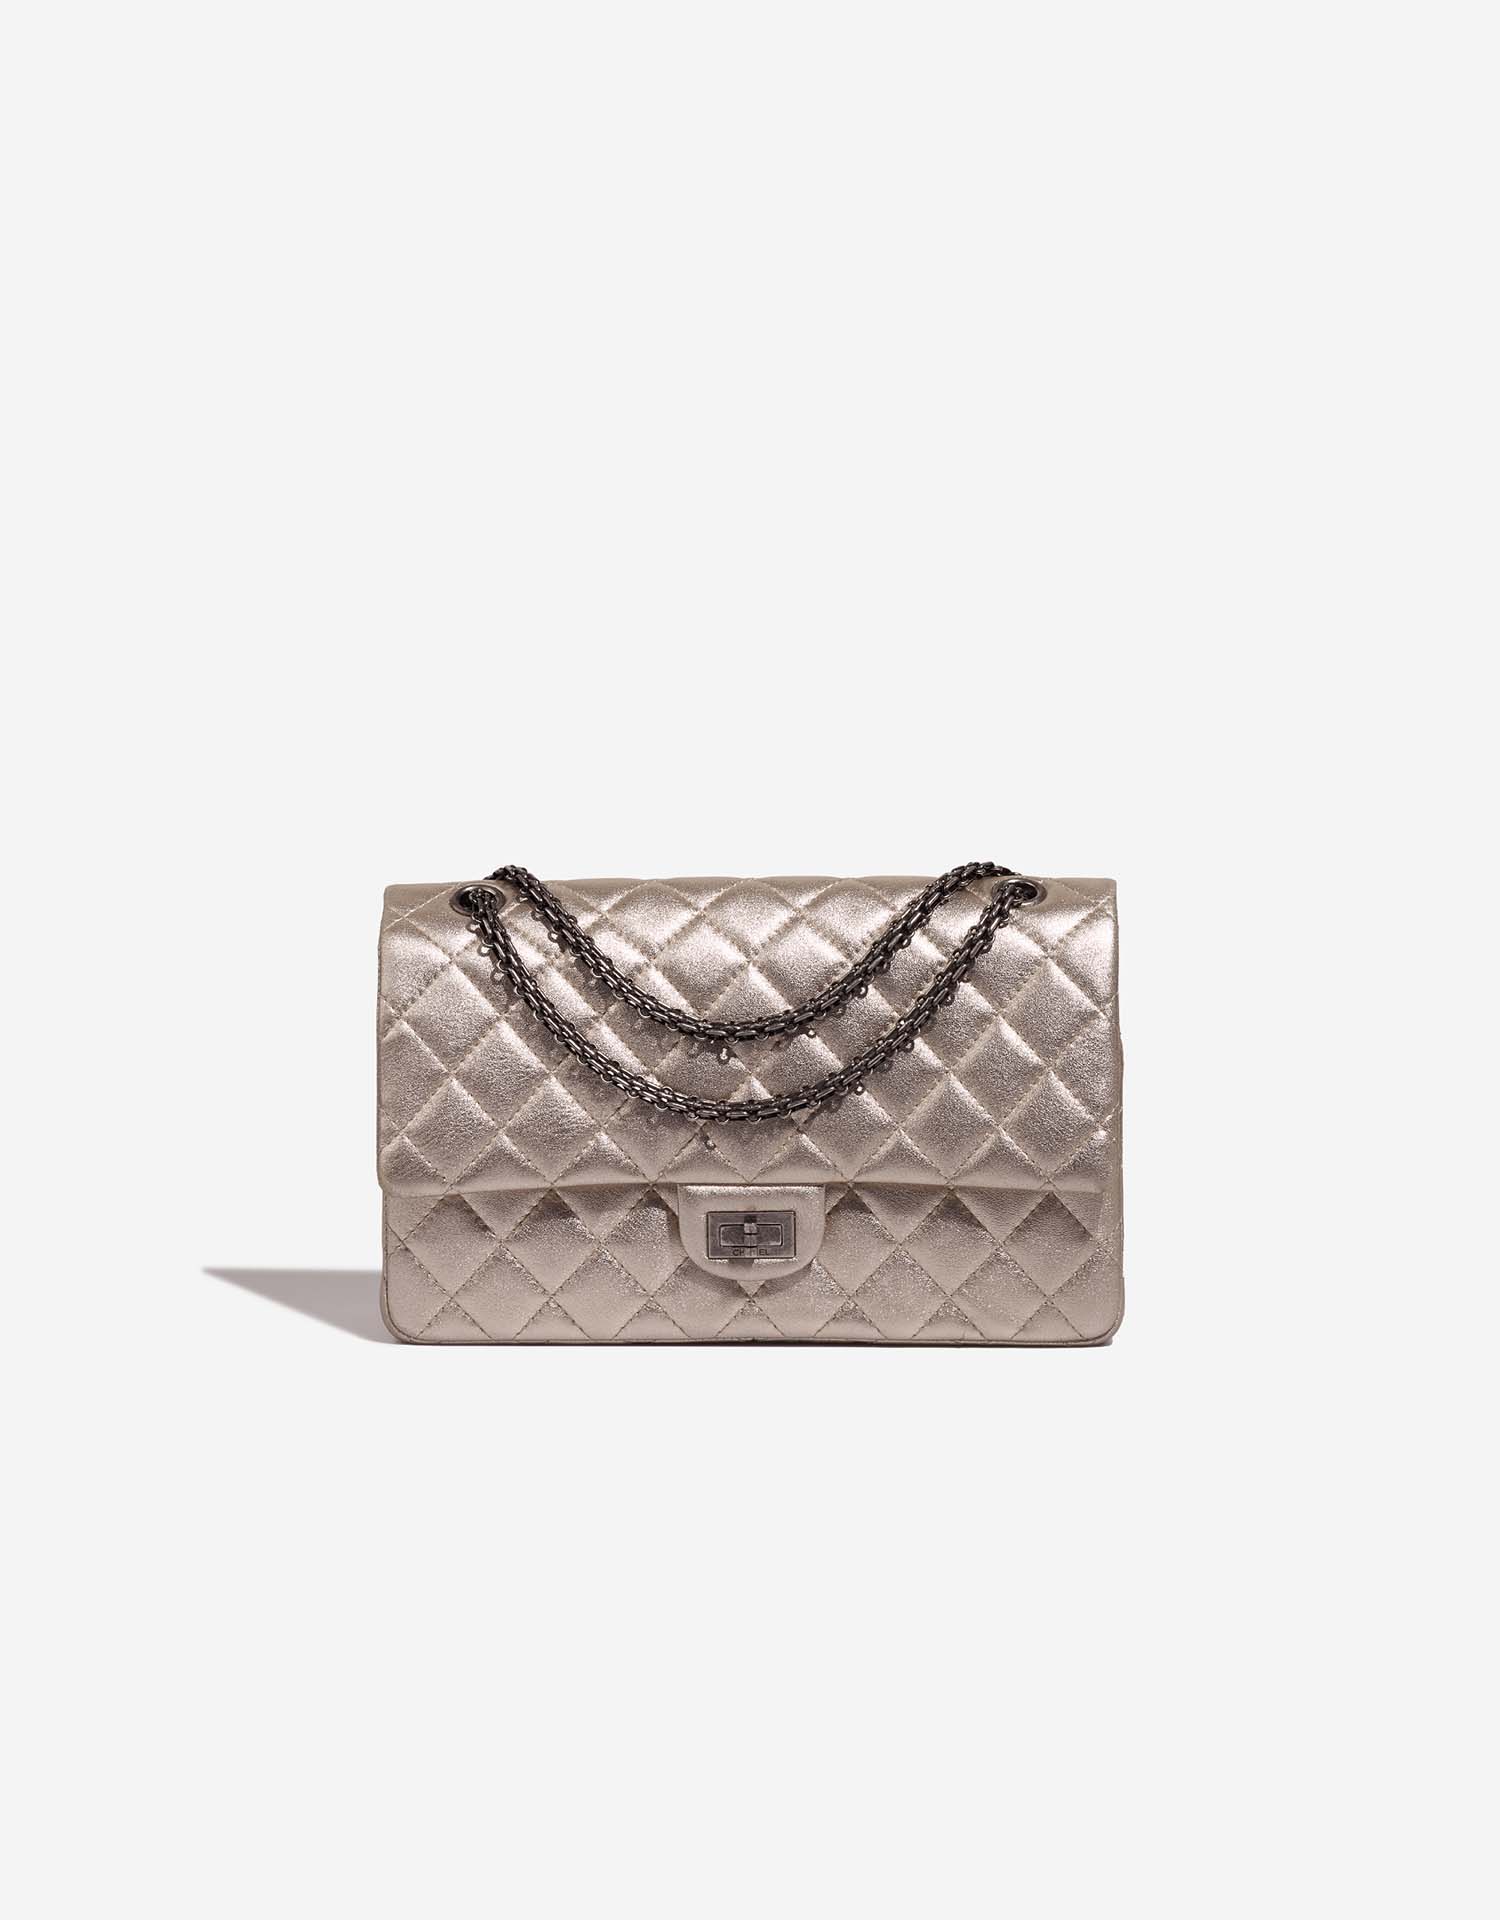 Chanel Metallic Grey Quilted Leather Reissue 2.55 Classic 226 Flap